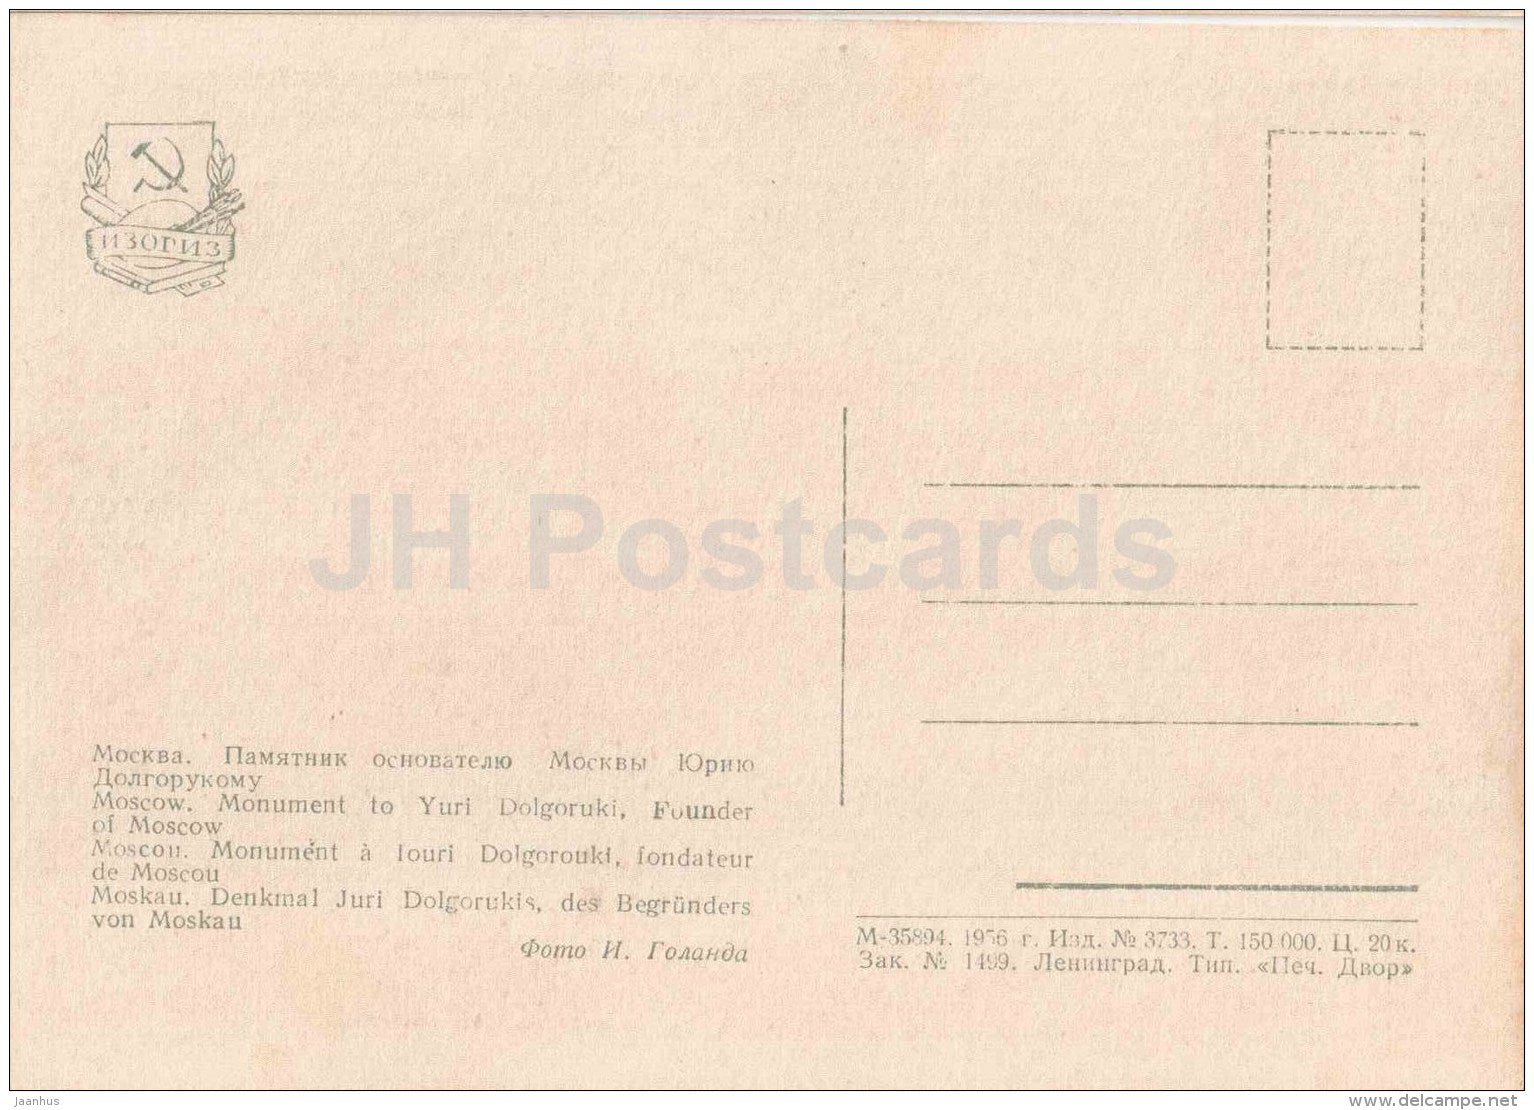 monument to Yuri Dolgoruki , Founder of Moscow - horse - Moscow - 1956 - Russia USSR - unused - JH Postcards